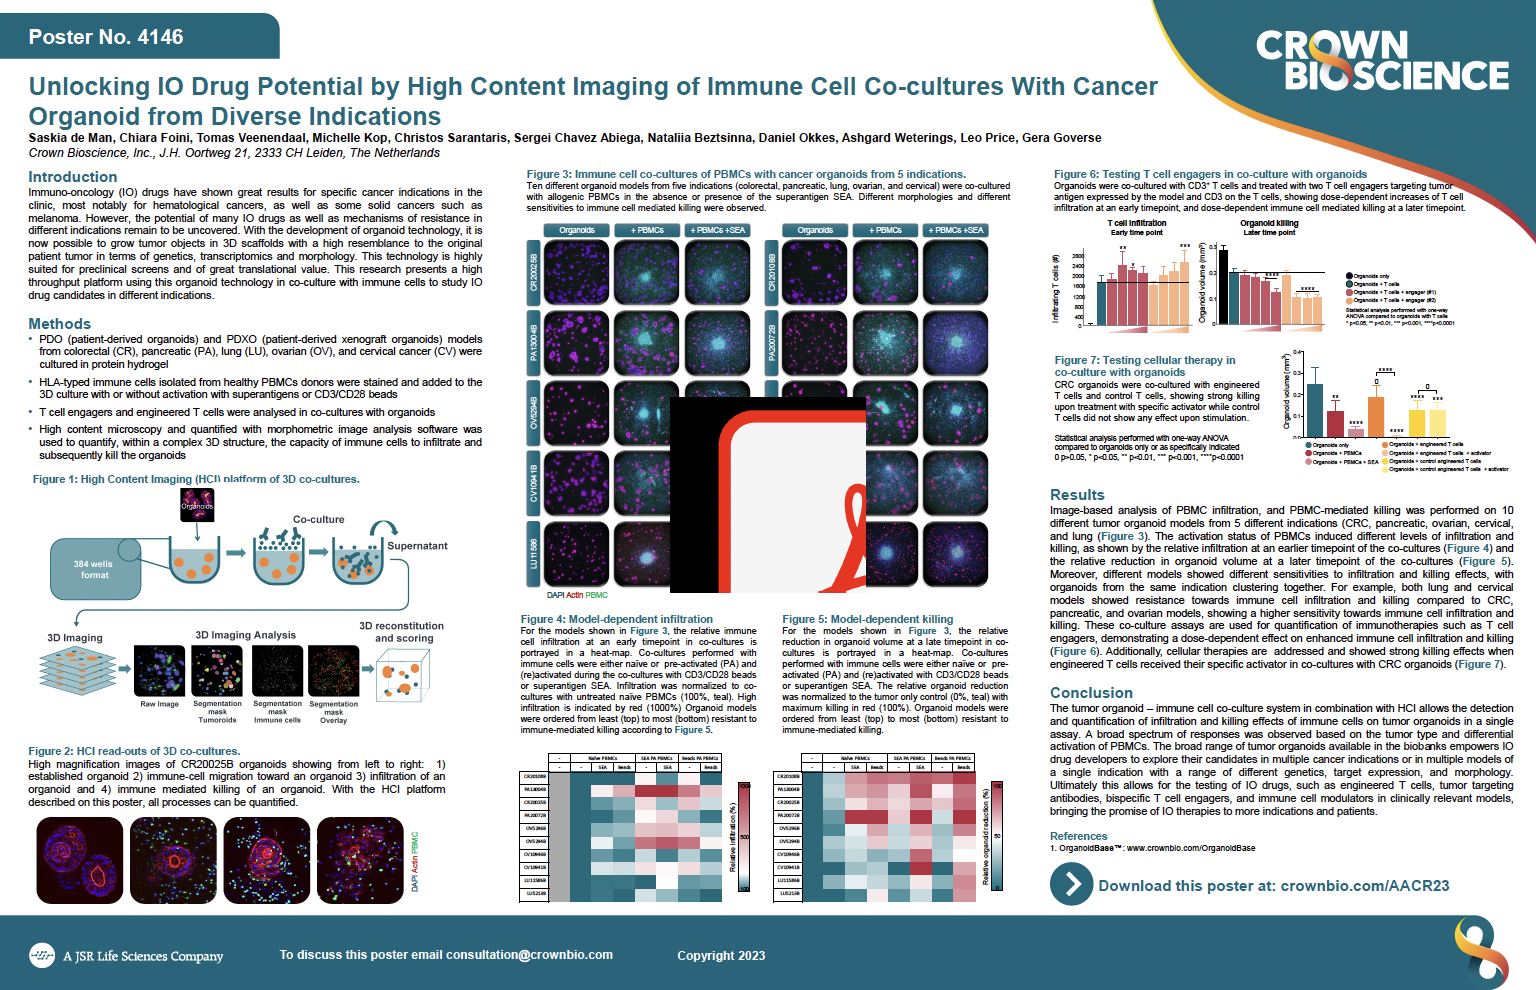 AACR 2023 Posters 4146: Unlocking IO Drug Potential by High Content Imaging of Immune Cell Co-cultures with Cancer Organoids from Diverse Cancer Indications